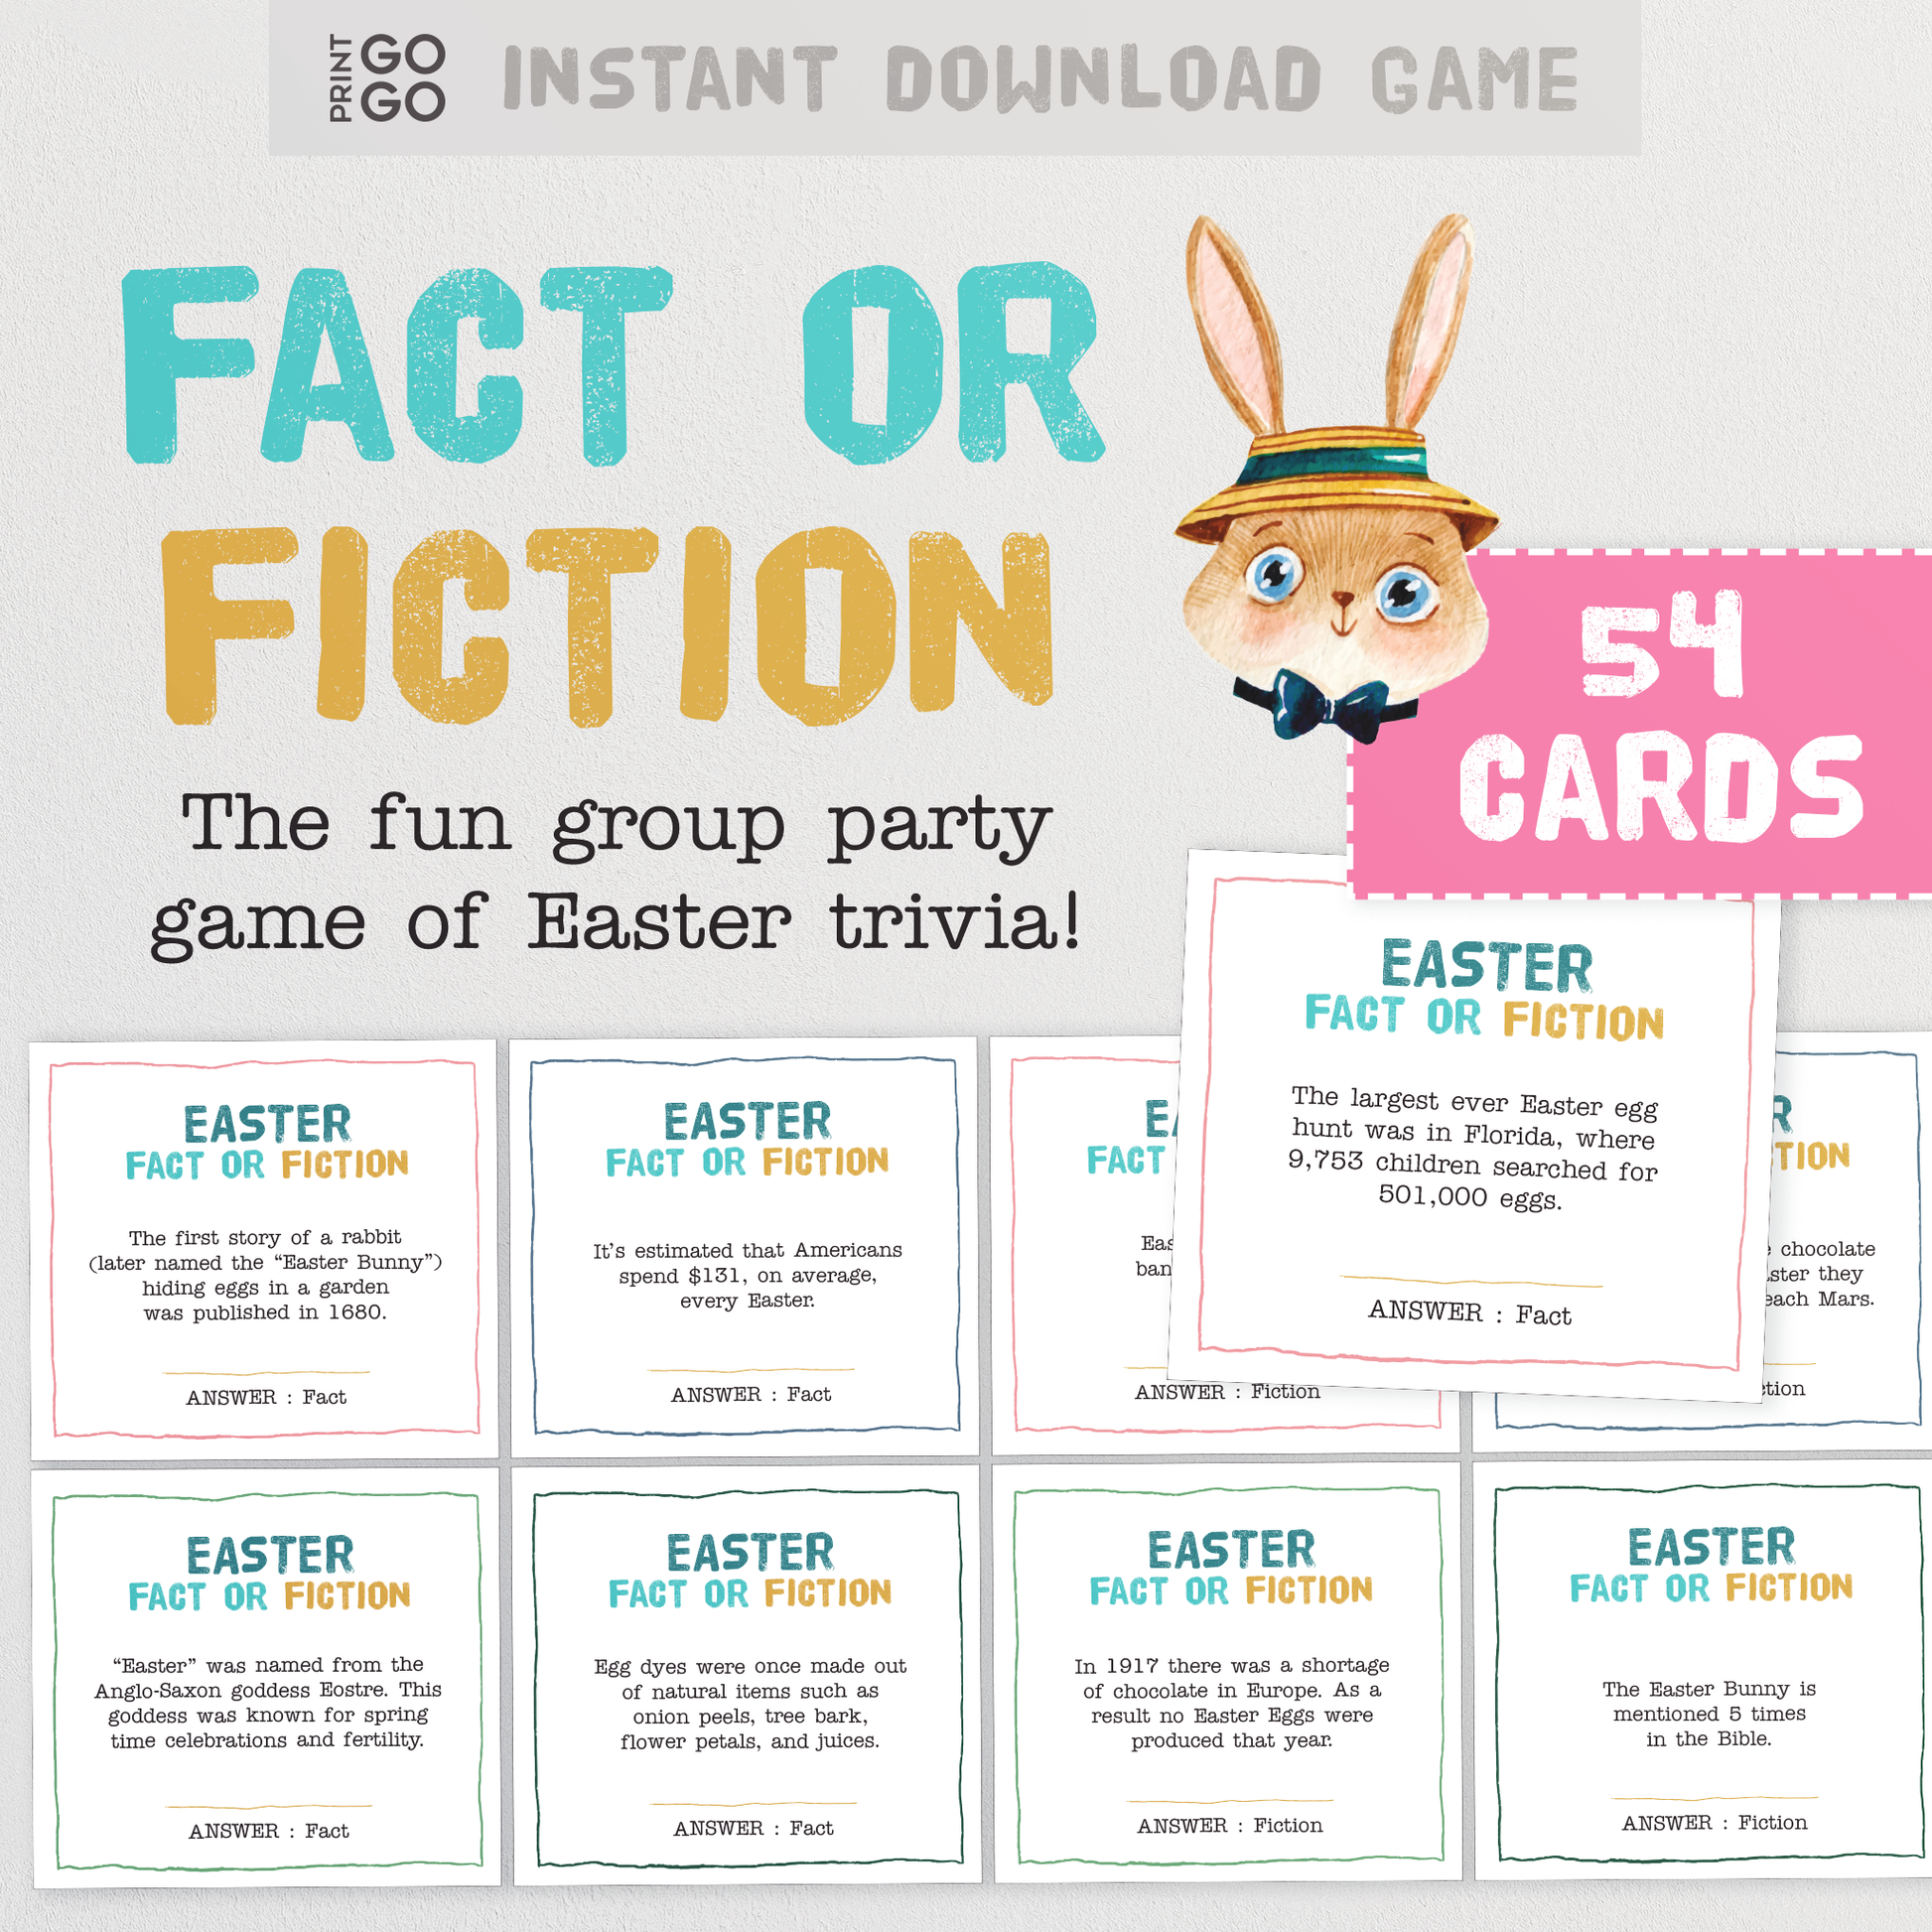 Easter Fact or Fiction - The Fun Group Party Game of Easter Trivia